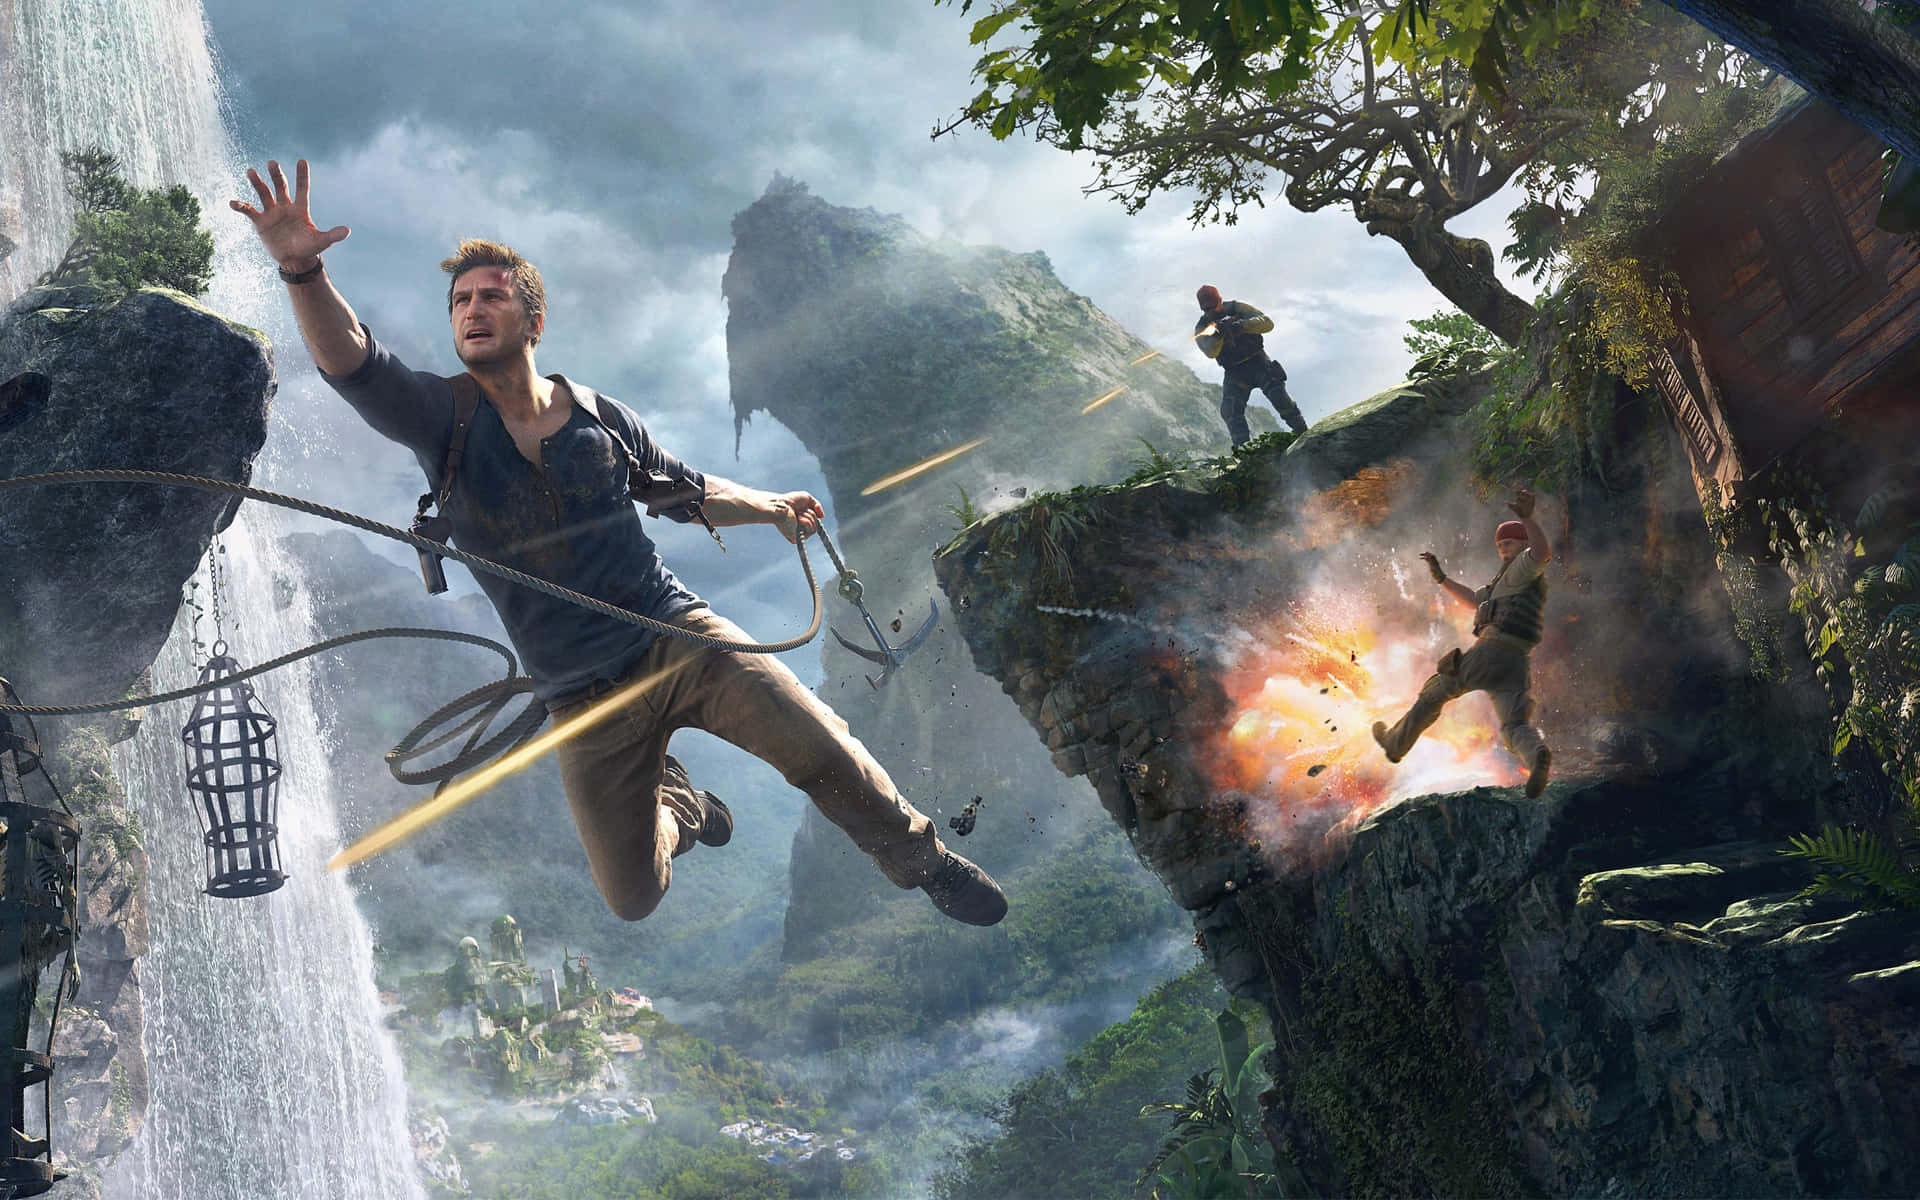 Uncharted4 - Pc - Pc - Pc - Pc - Pc Wallpaper